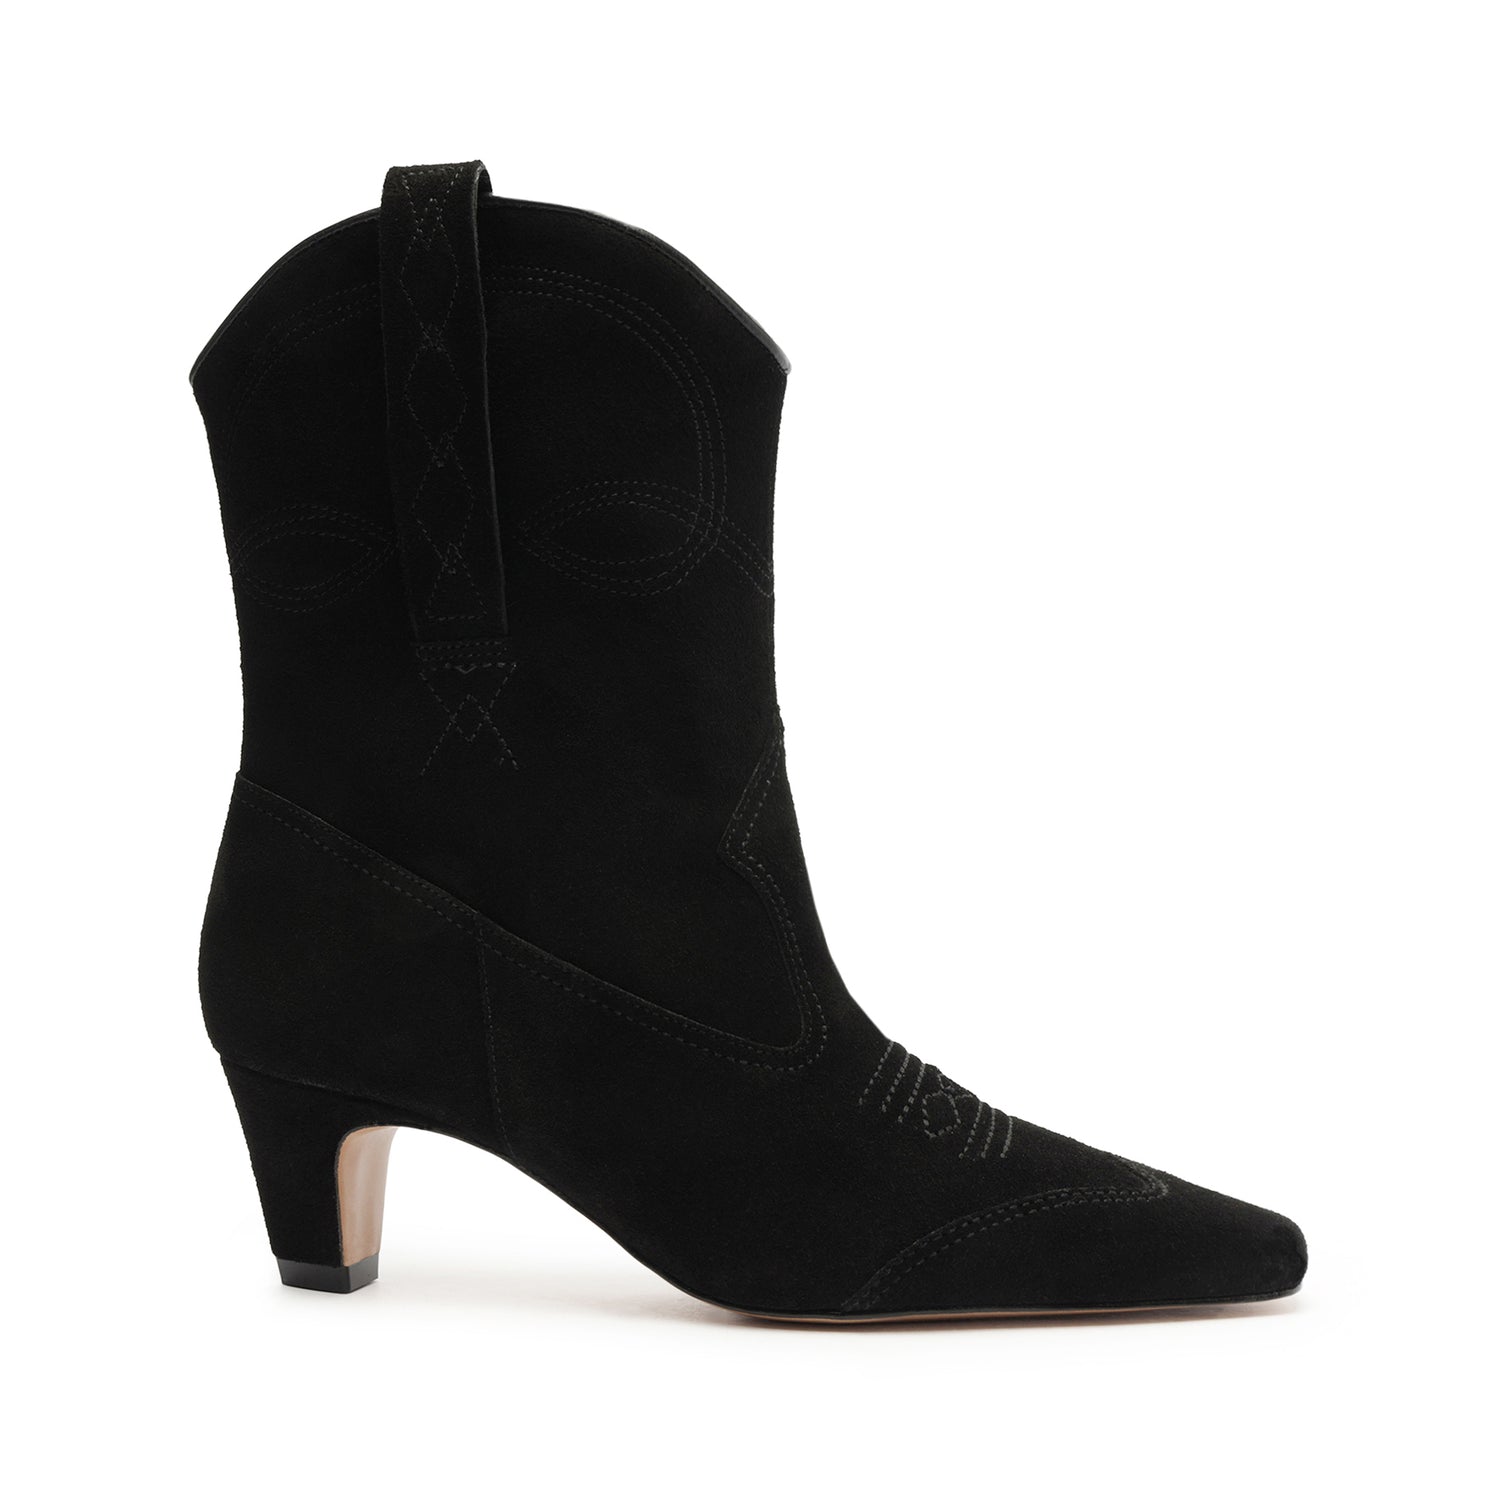 Booties for $ 89